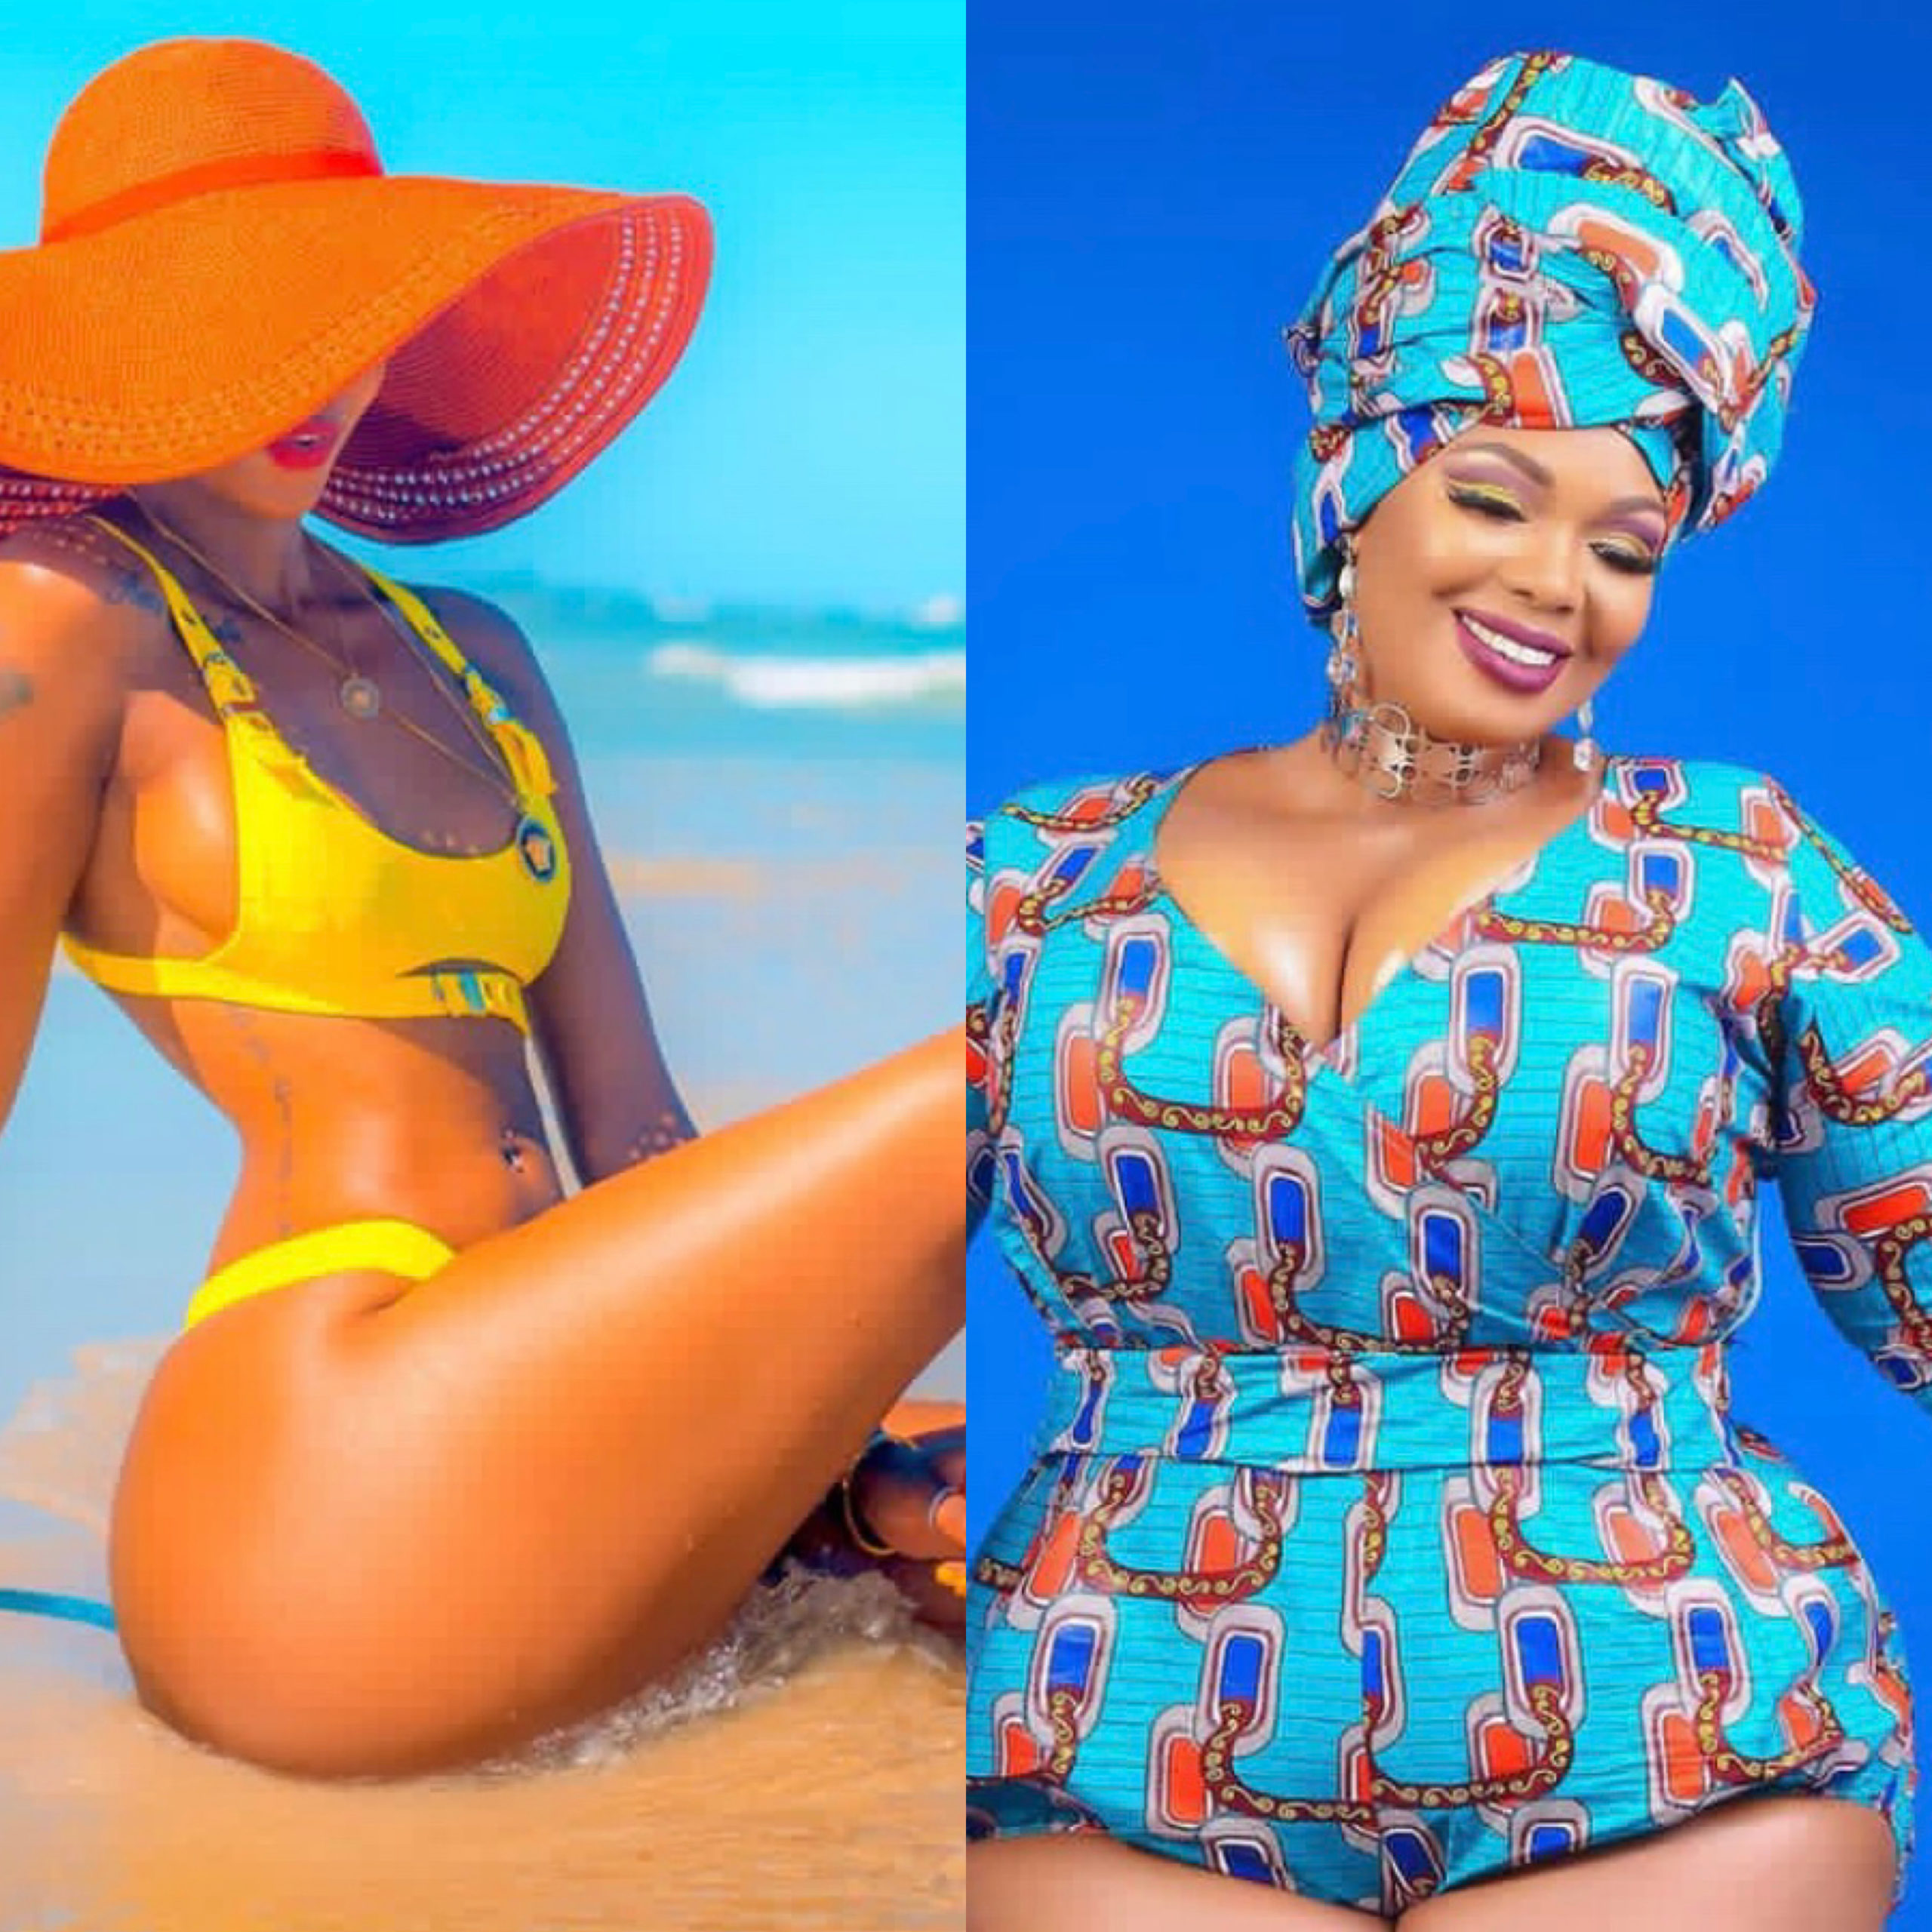 Neomi Ng’ang’a among other female celebrities call out Huddah for her fat shaming statement!